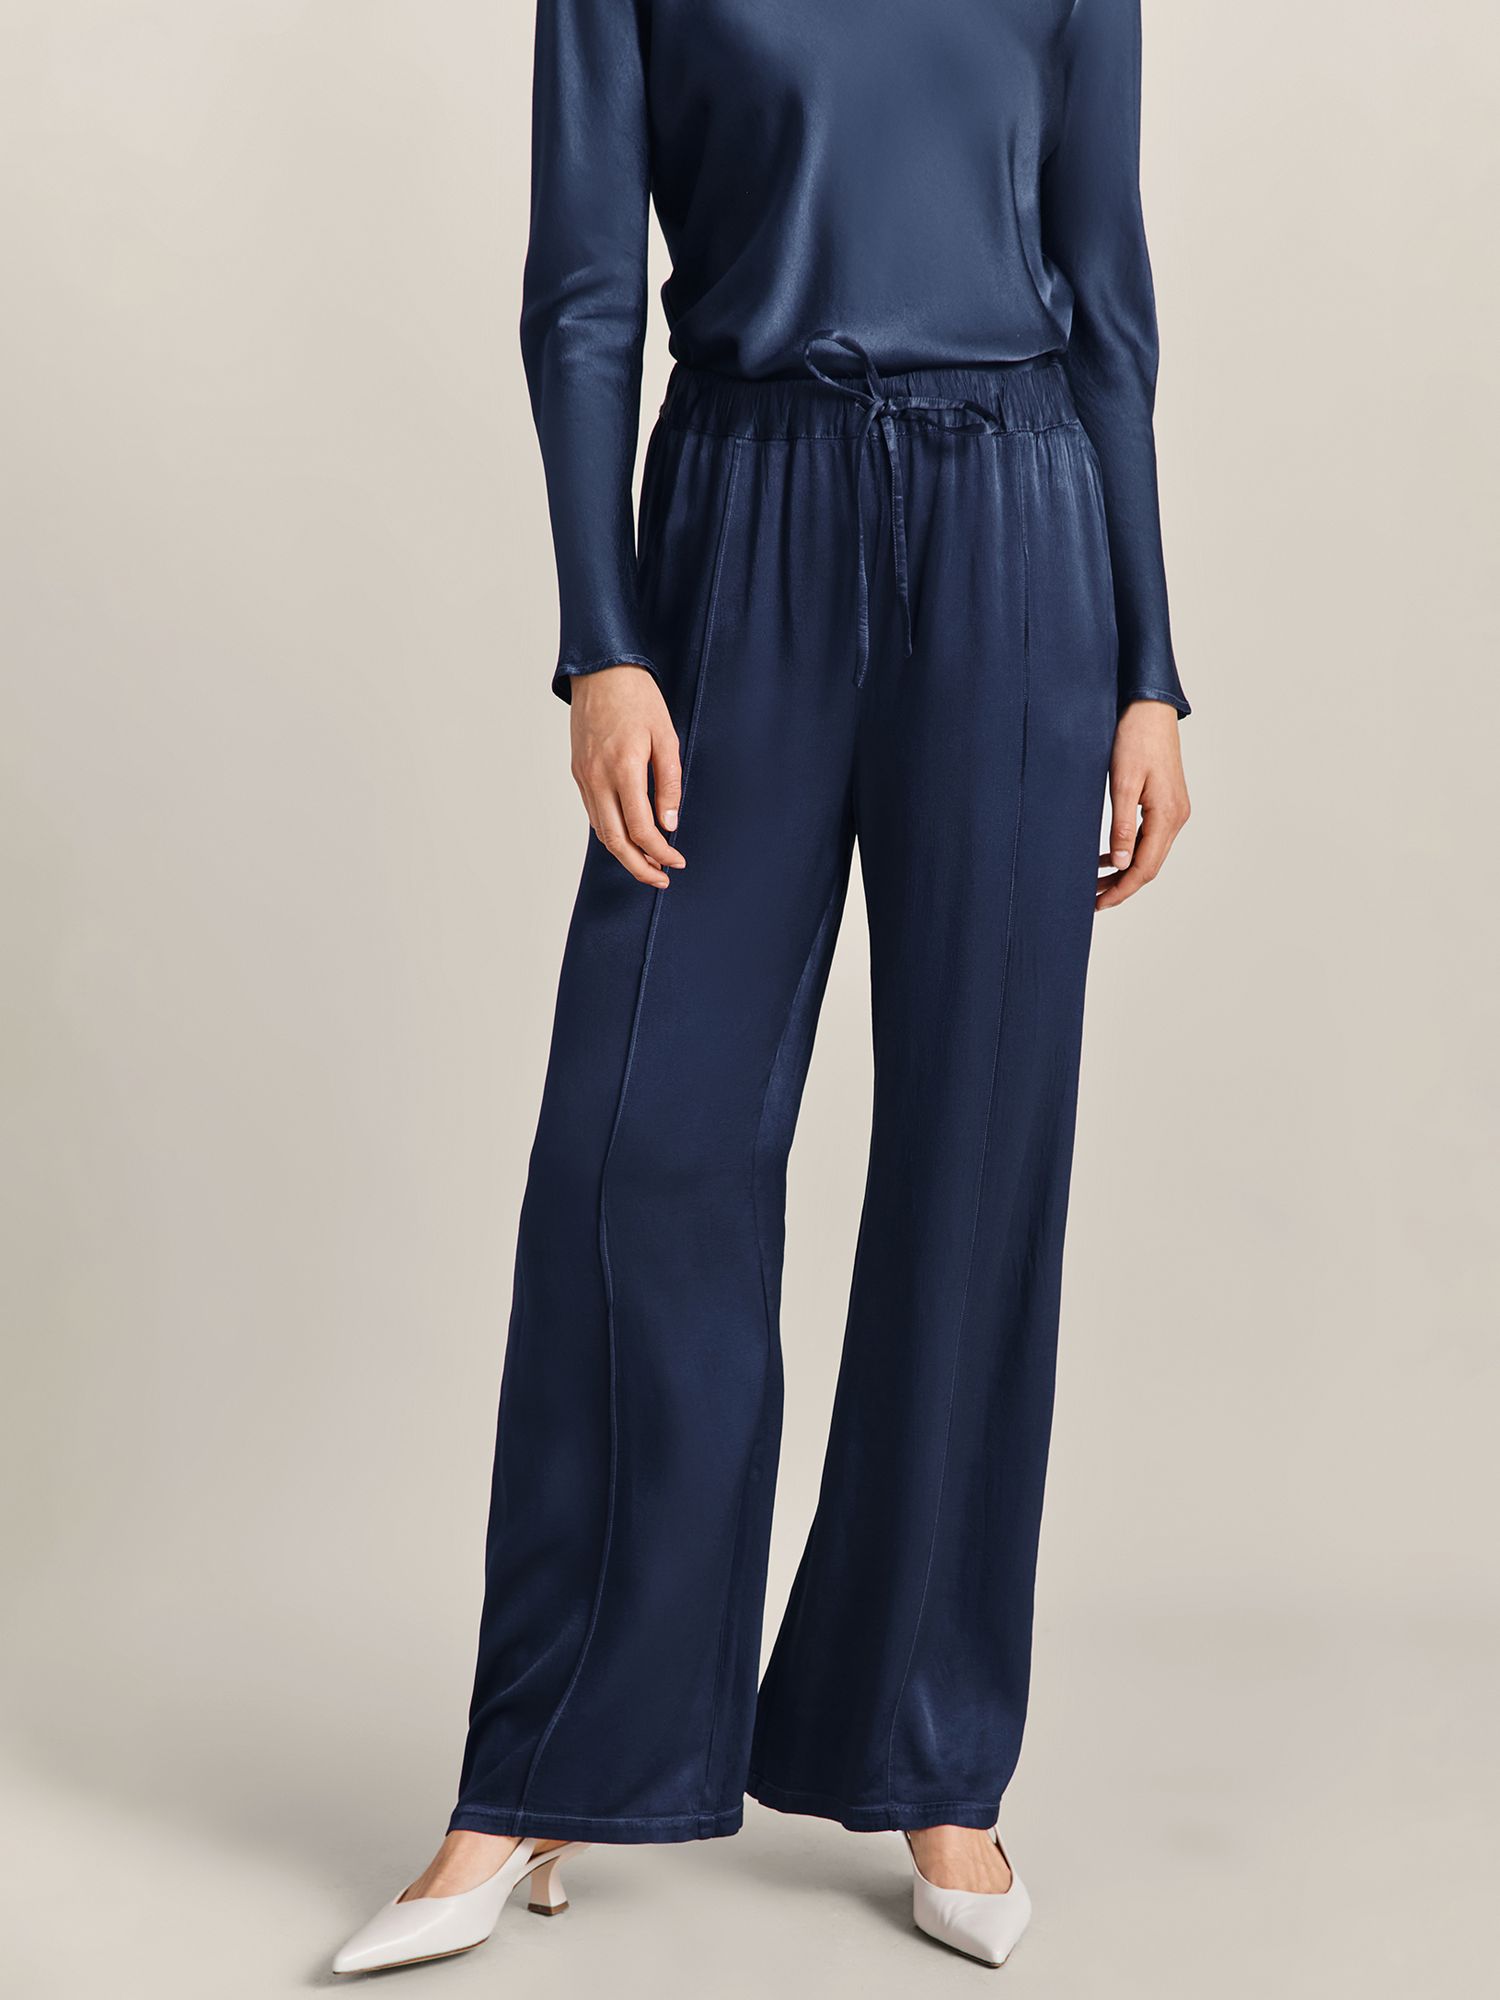 Ghost Lucia Wide Leg Satin Trousers, Dark Midnight at John Lewis & Partners